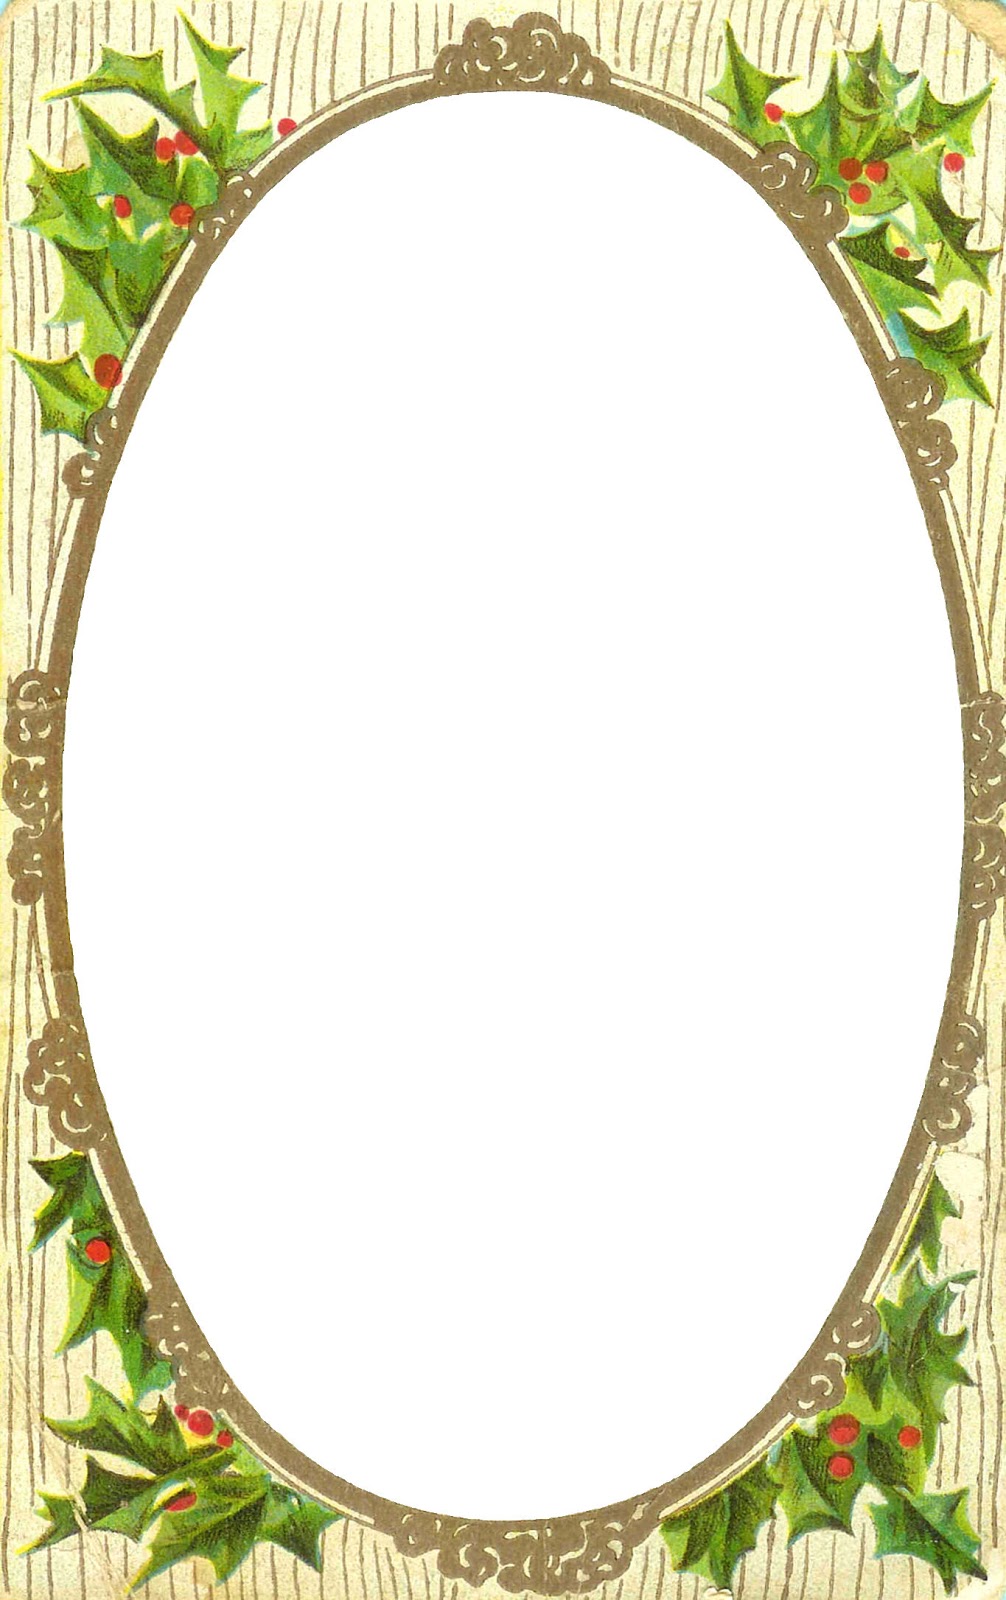 Antique Frame Clipart Posted On Thursday April 25th 2013 At 2 11 Pm